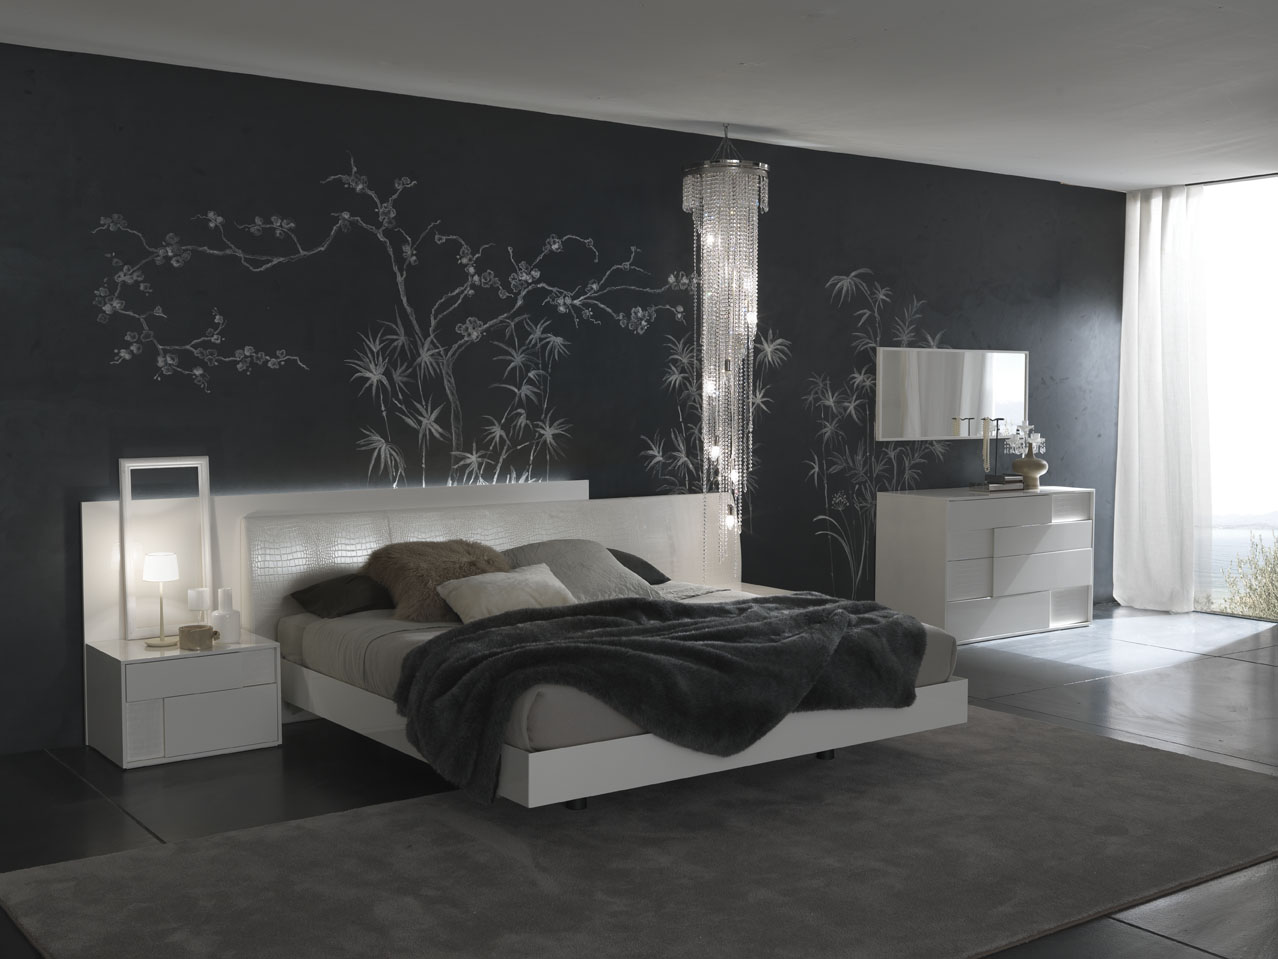 30 Contemporary Bedroom Design For Your Home – The WoW Style